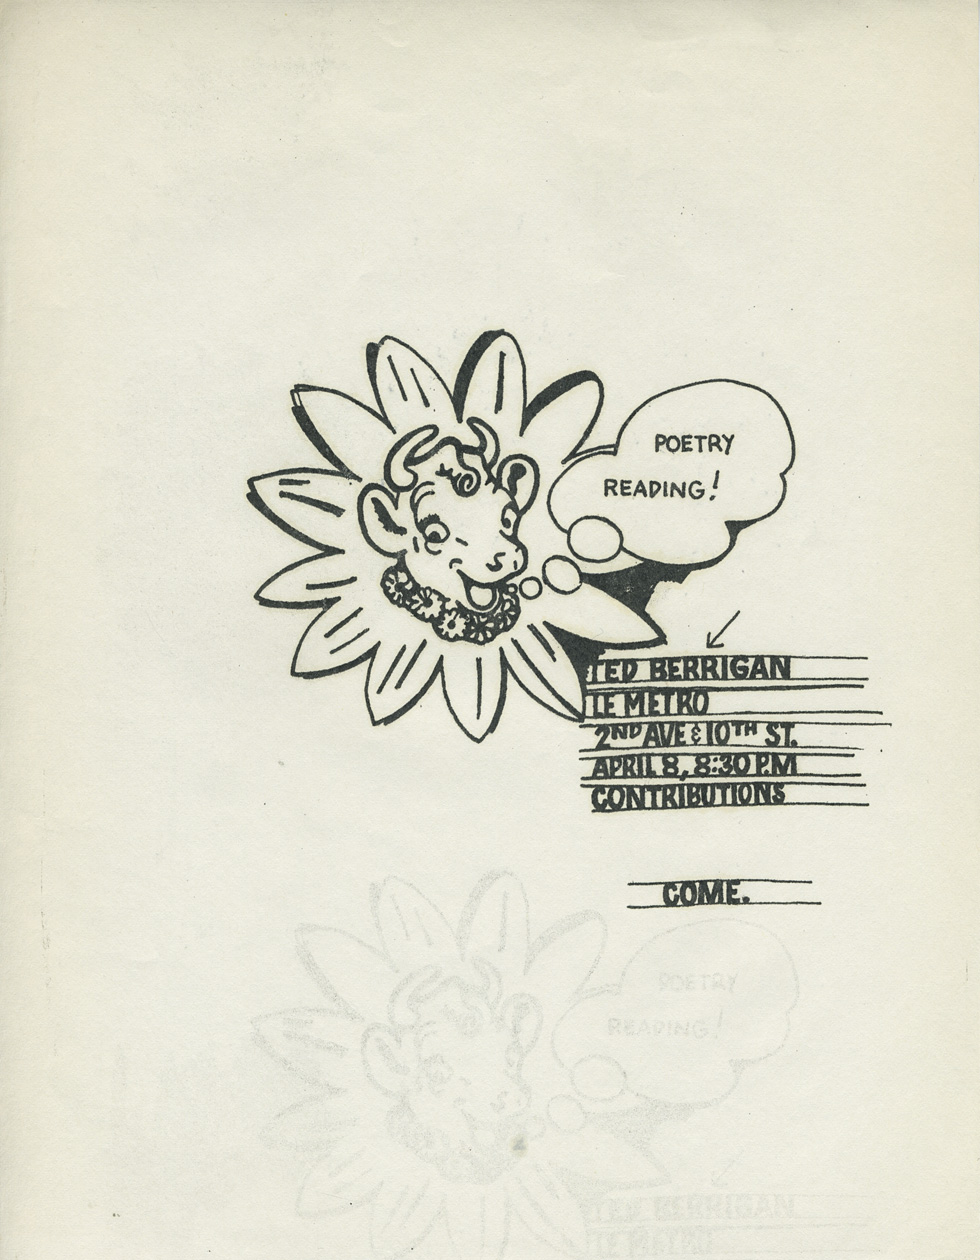 Flyer for  a reading by Ted Berrigan at Café Le Metro, New York City, April 8, 1964. Artwork by Joe Brainard.